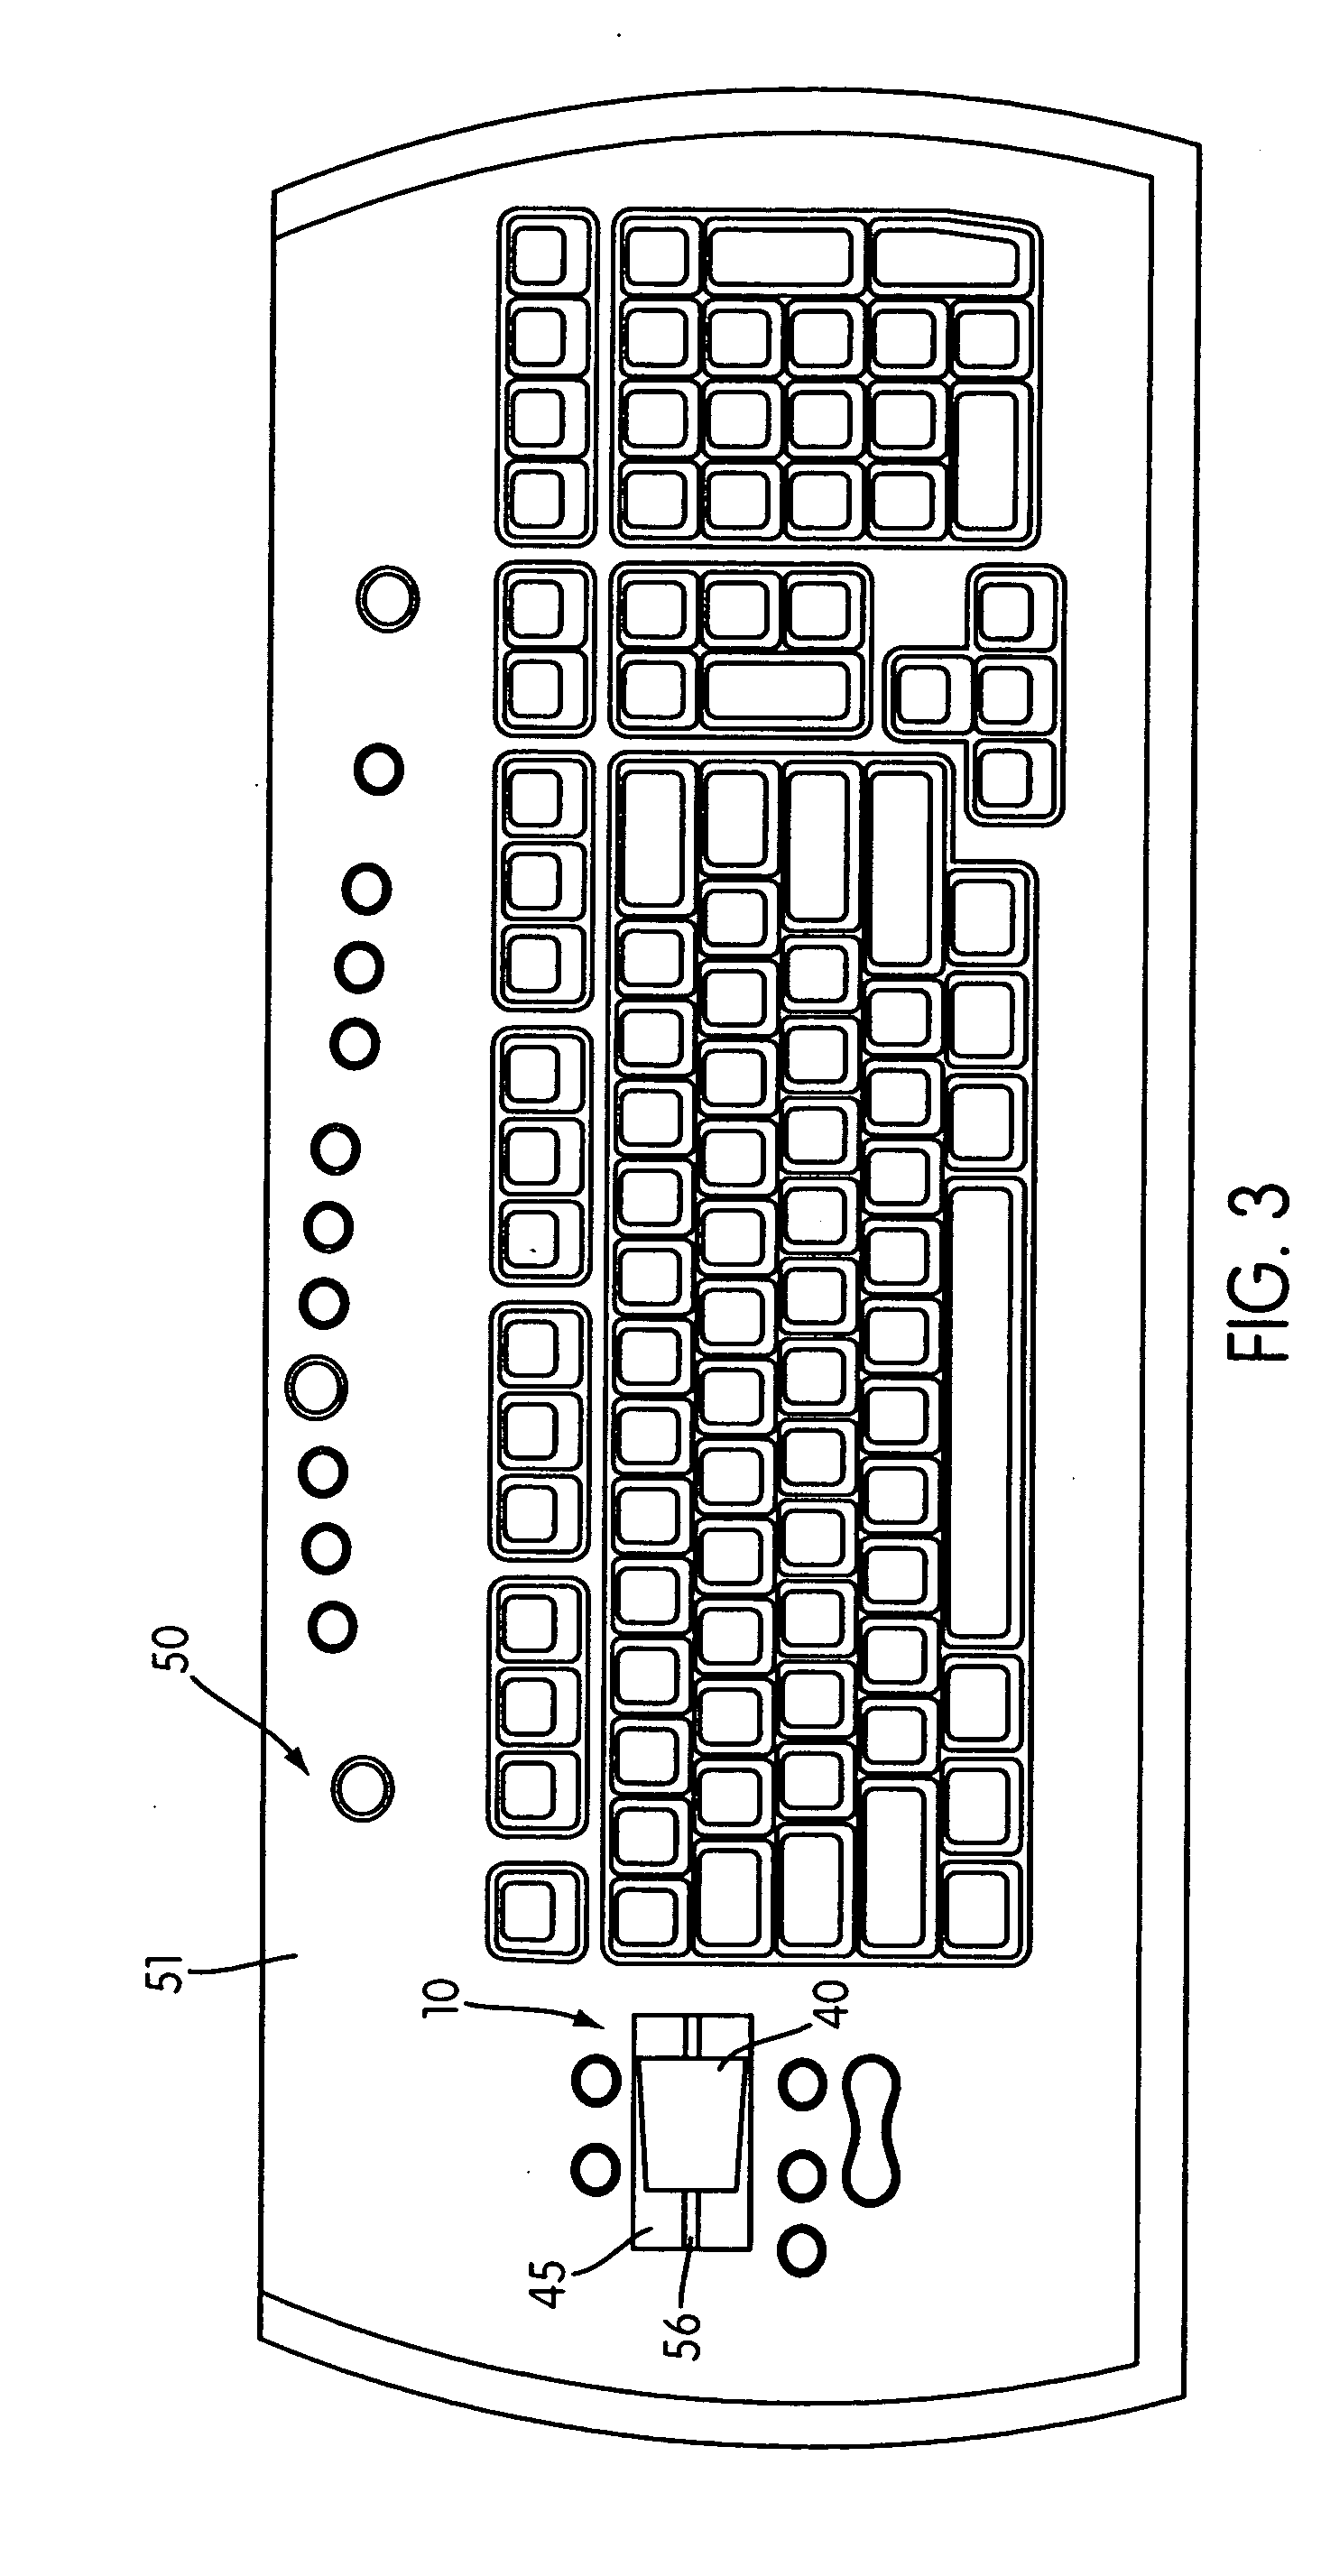 Input device including a wheel assembly for scrolling an image in multiple directions